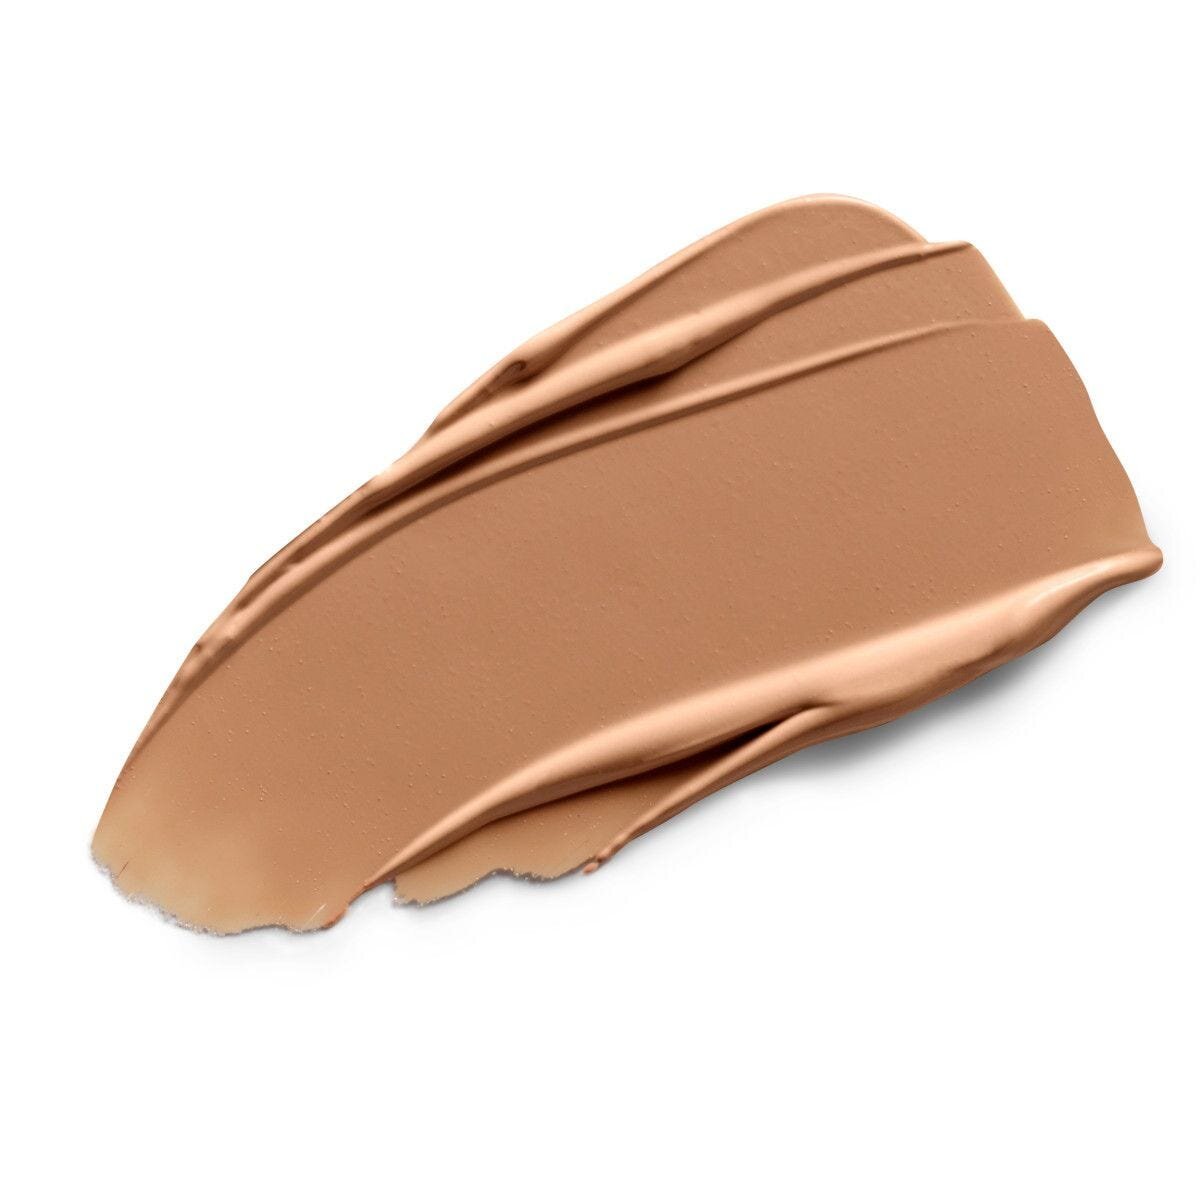 BUTTER BELIEVE IT FOUNDATION AND CONCEALER MEDIUM - PHYSICIANS FORMULA